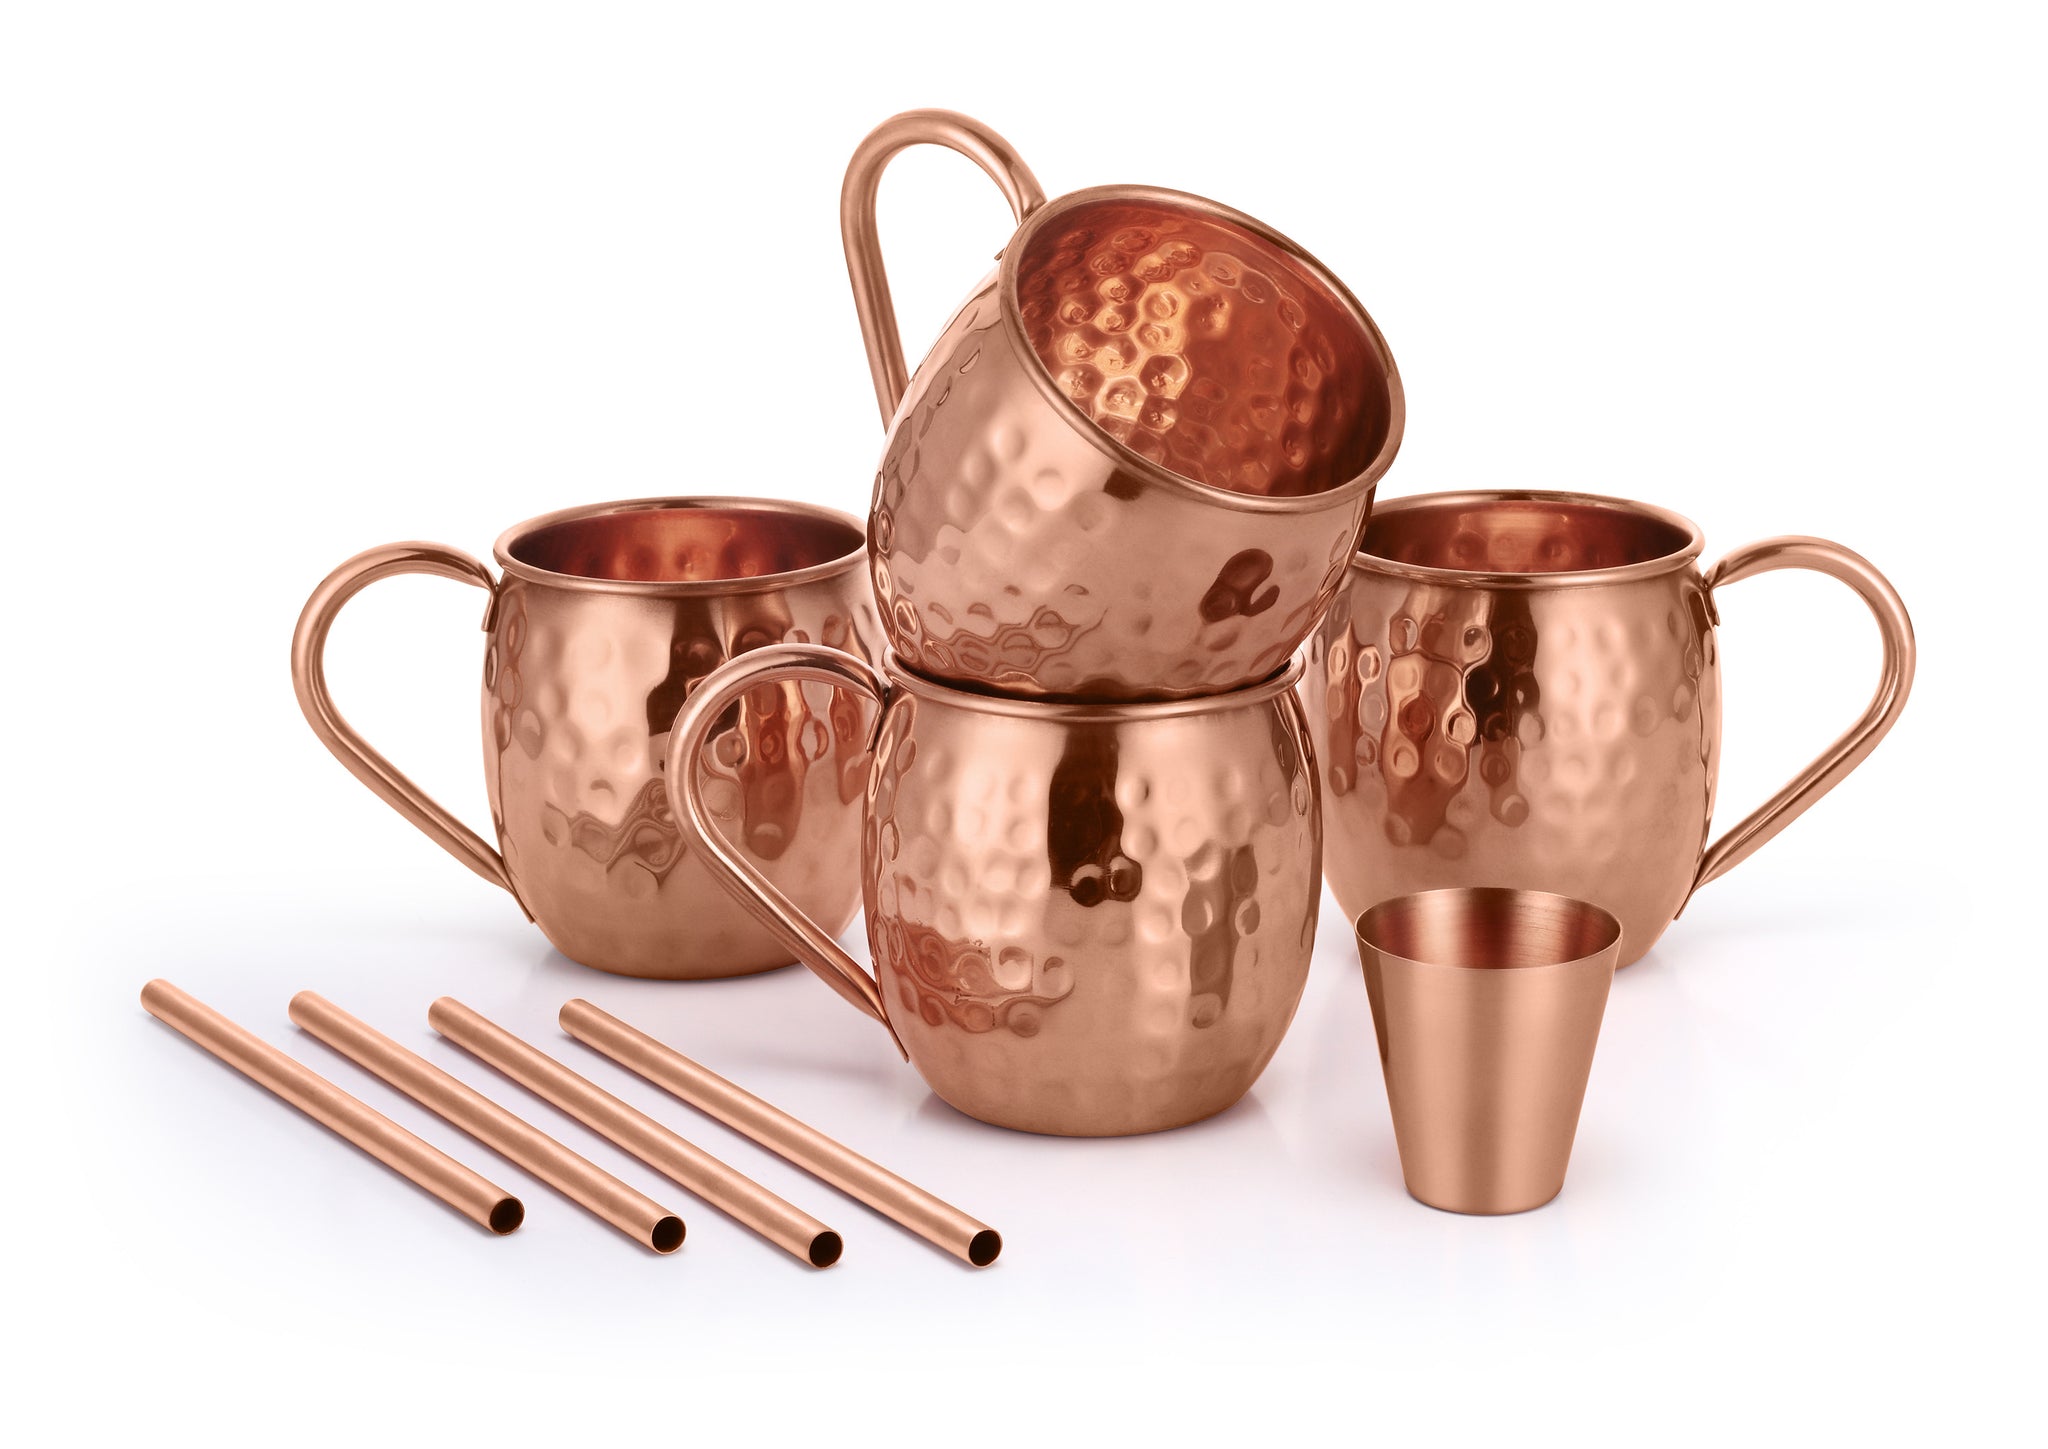 Solid Copper Moscow Mule Mug